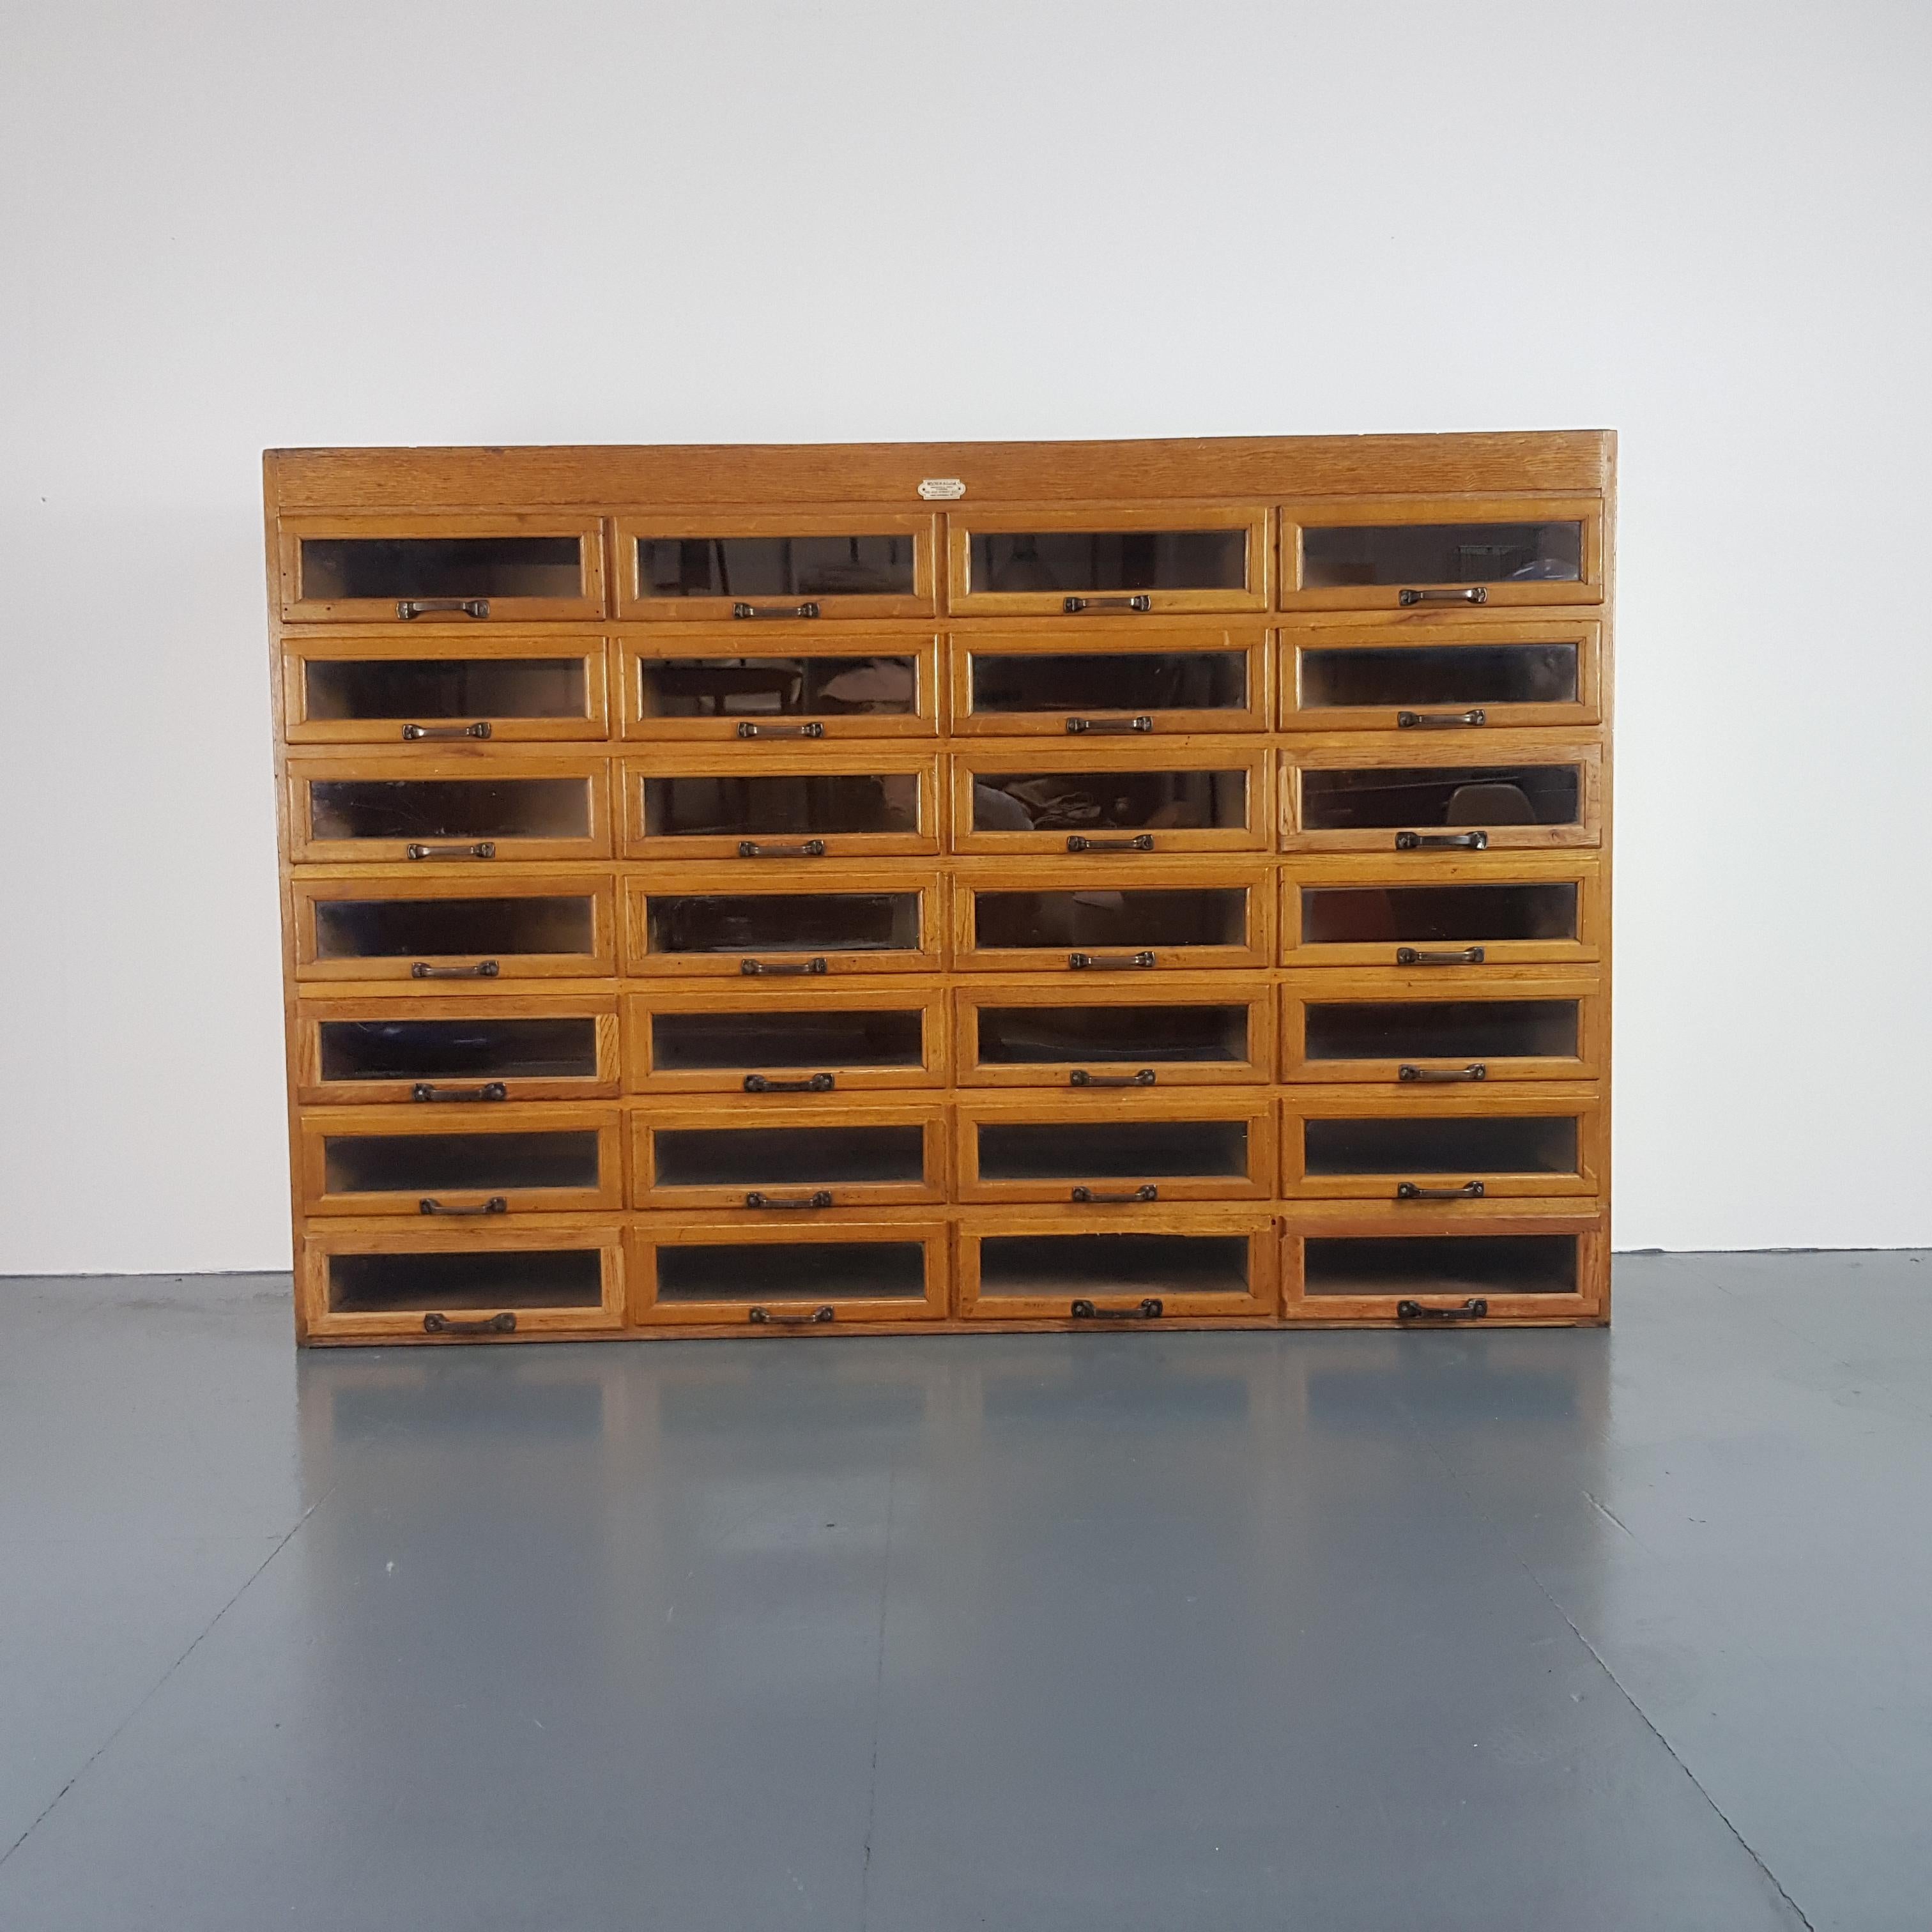 Early 20th century haberdashery cabinet.

Fantastic 28-drawer haberdashery chest.

In good vintage condition.  Some scuffs here and there commensurate with age.  Please bear in mind this has come from a working shop and is from the middle of the